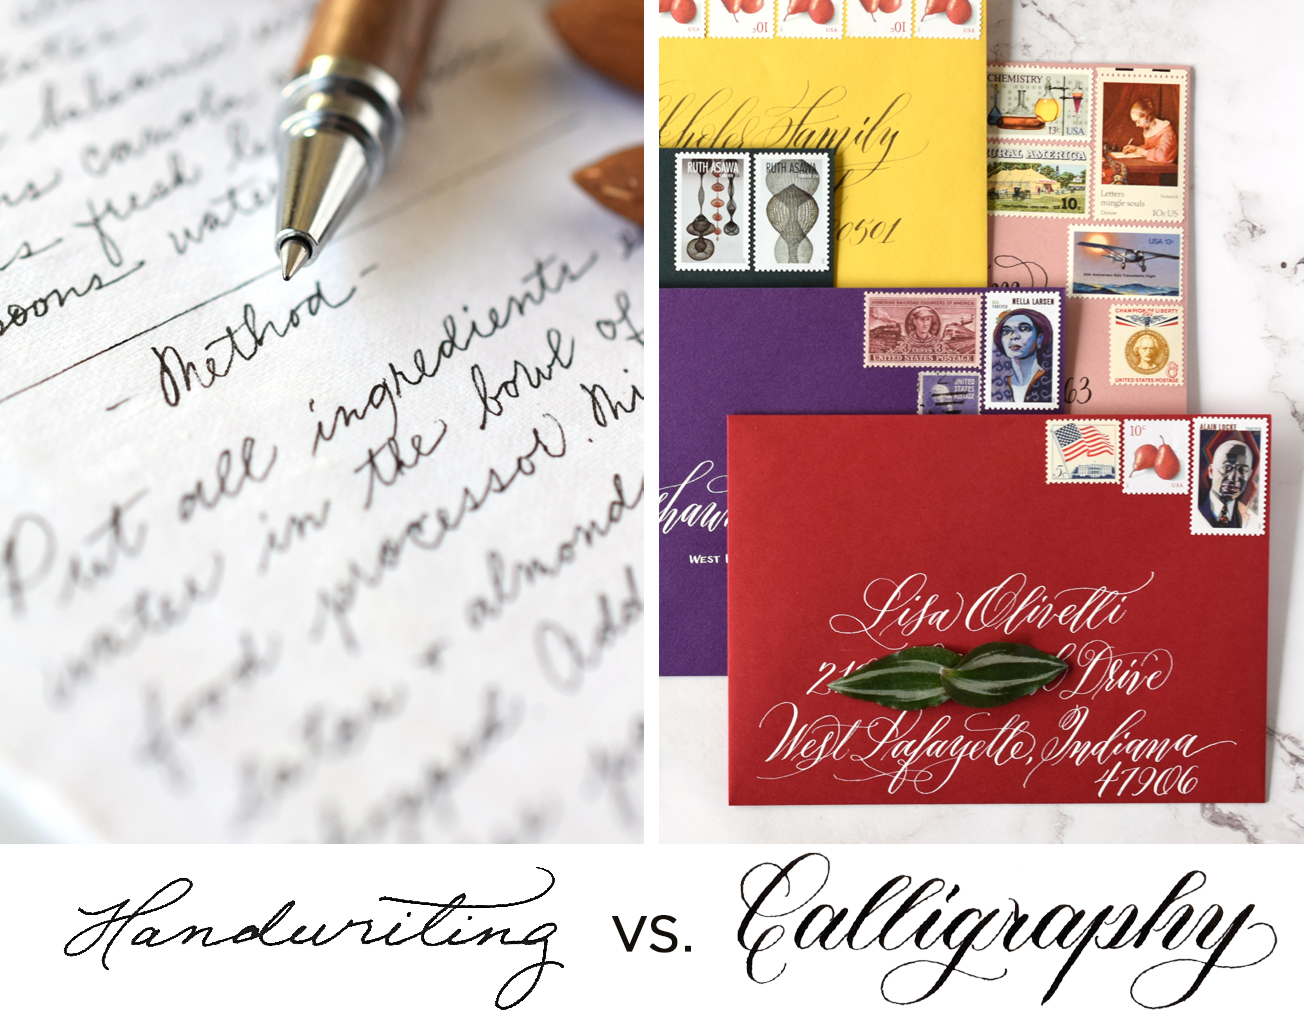 Handwriting Versus Calligraphy: What’s the Difference?